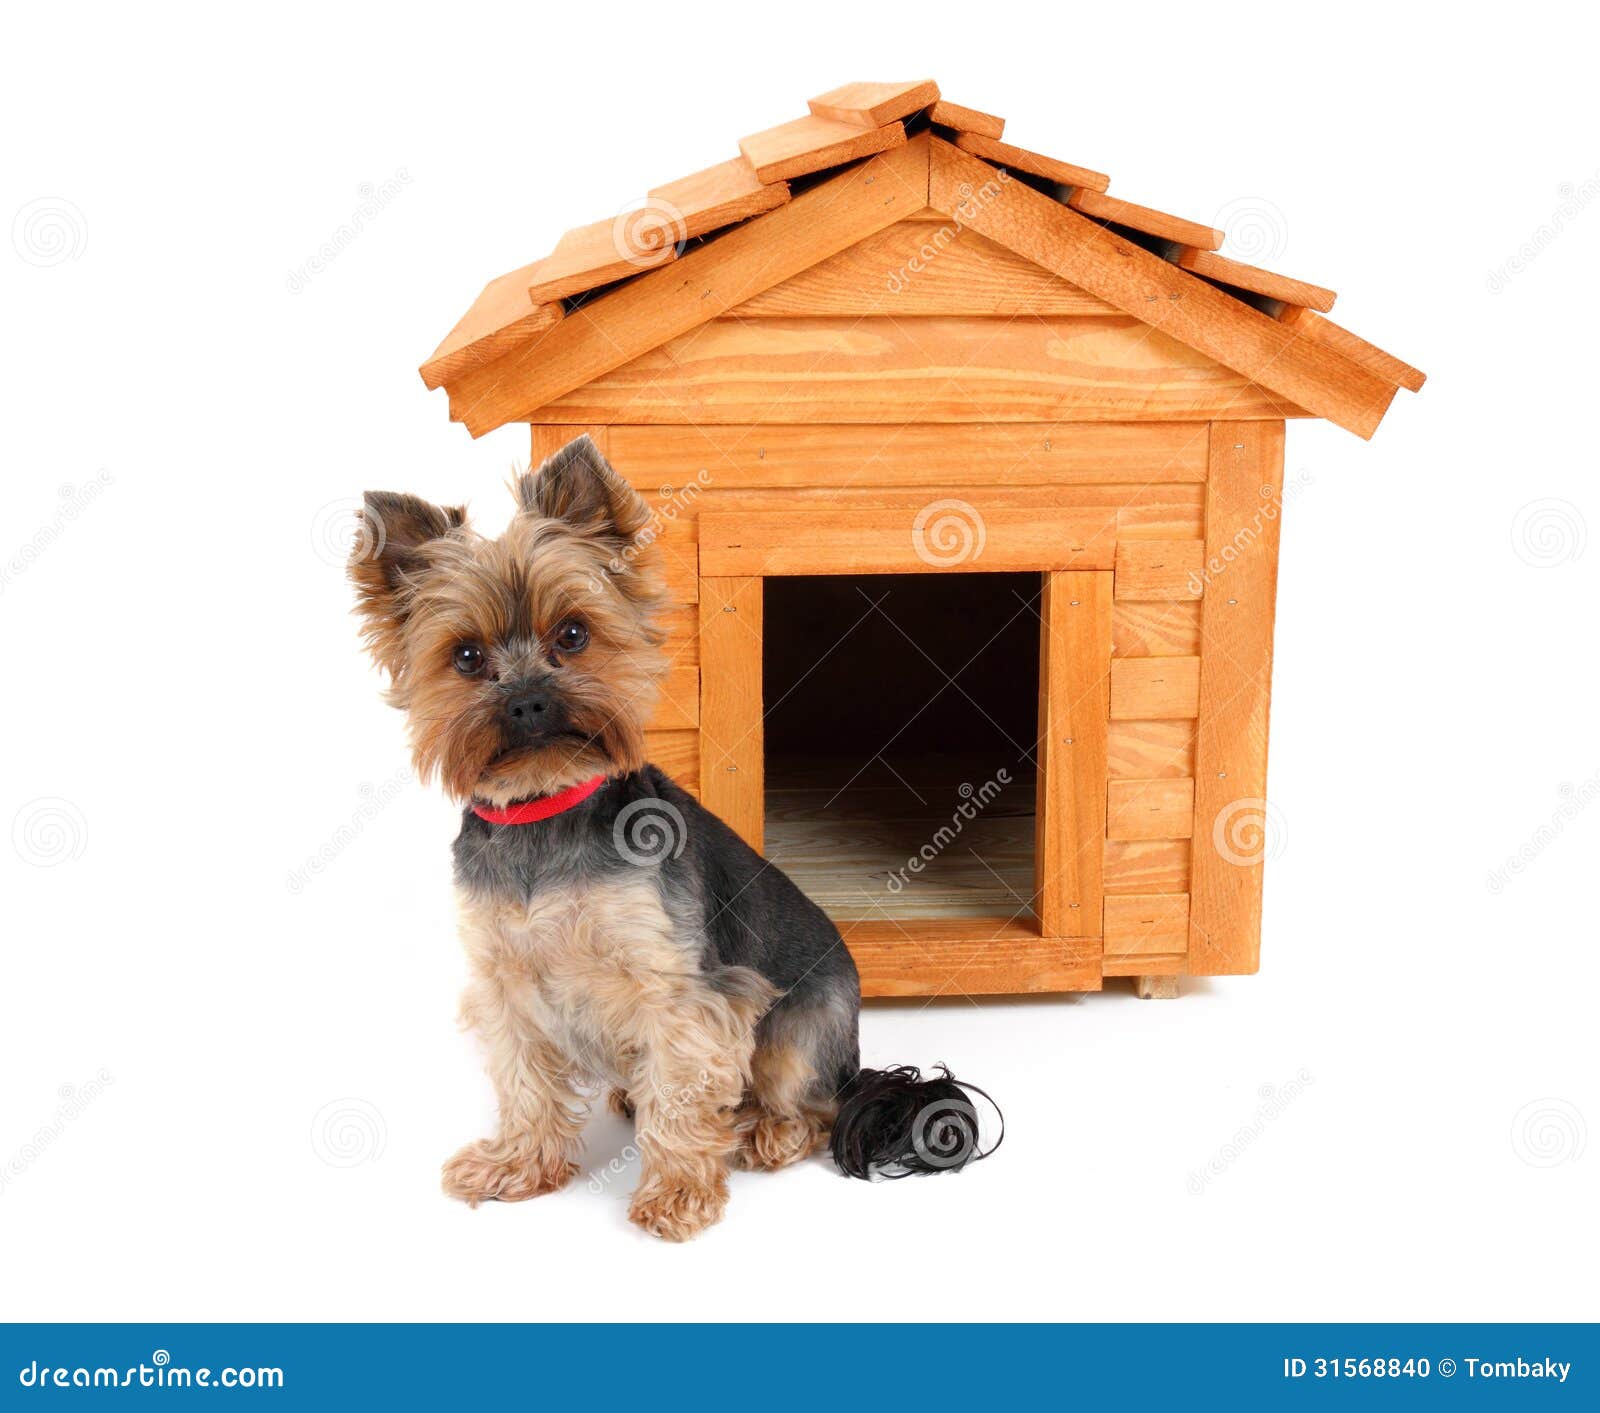  House Plans Free Outdoor Plans DIY Shed Wooden. on small dog house